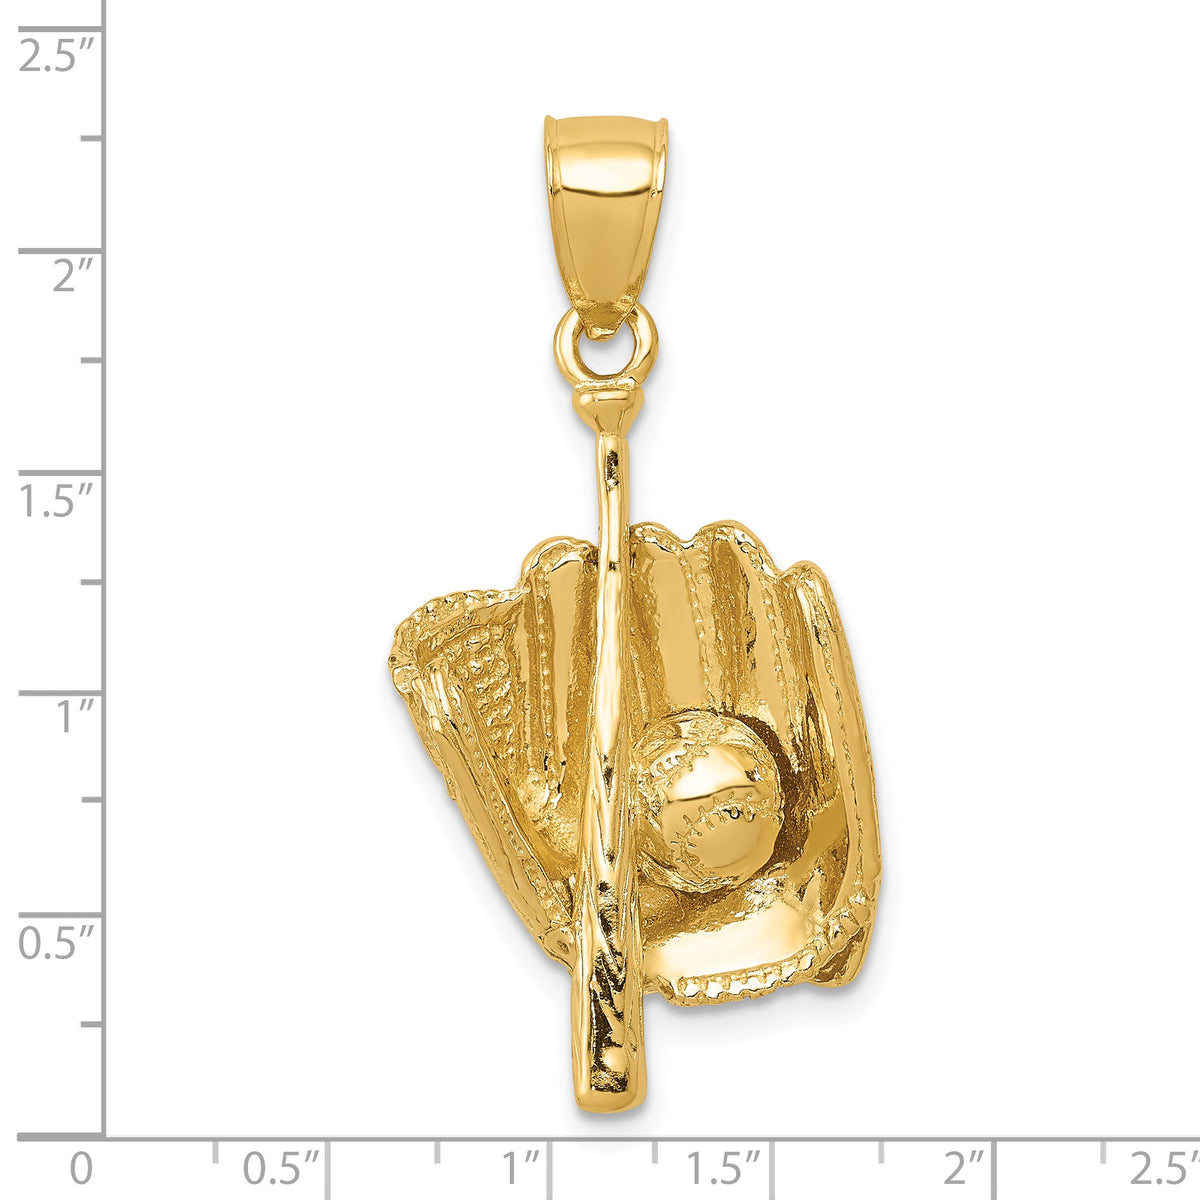 Alternate view of the 14k Yellow Gold Three Dimensional Baseball Pendant by The Black Bow Jewelry Co.